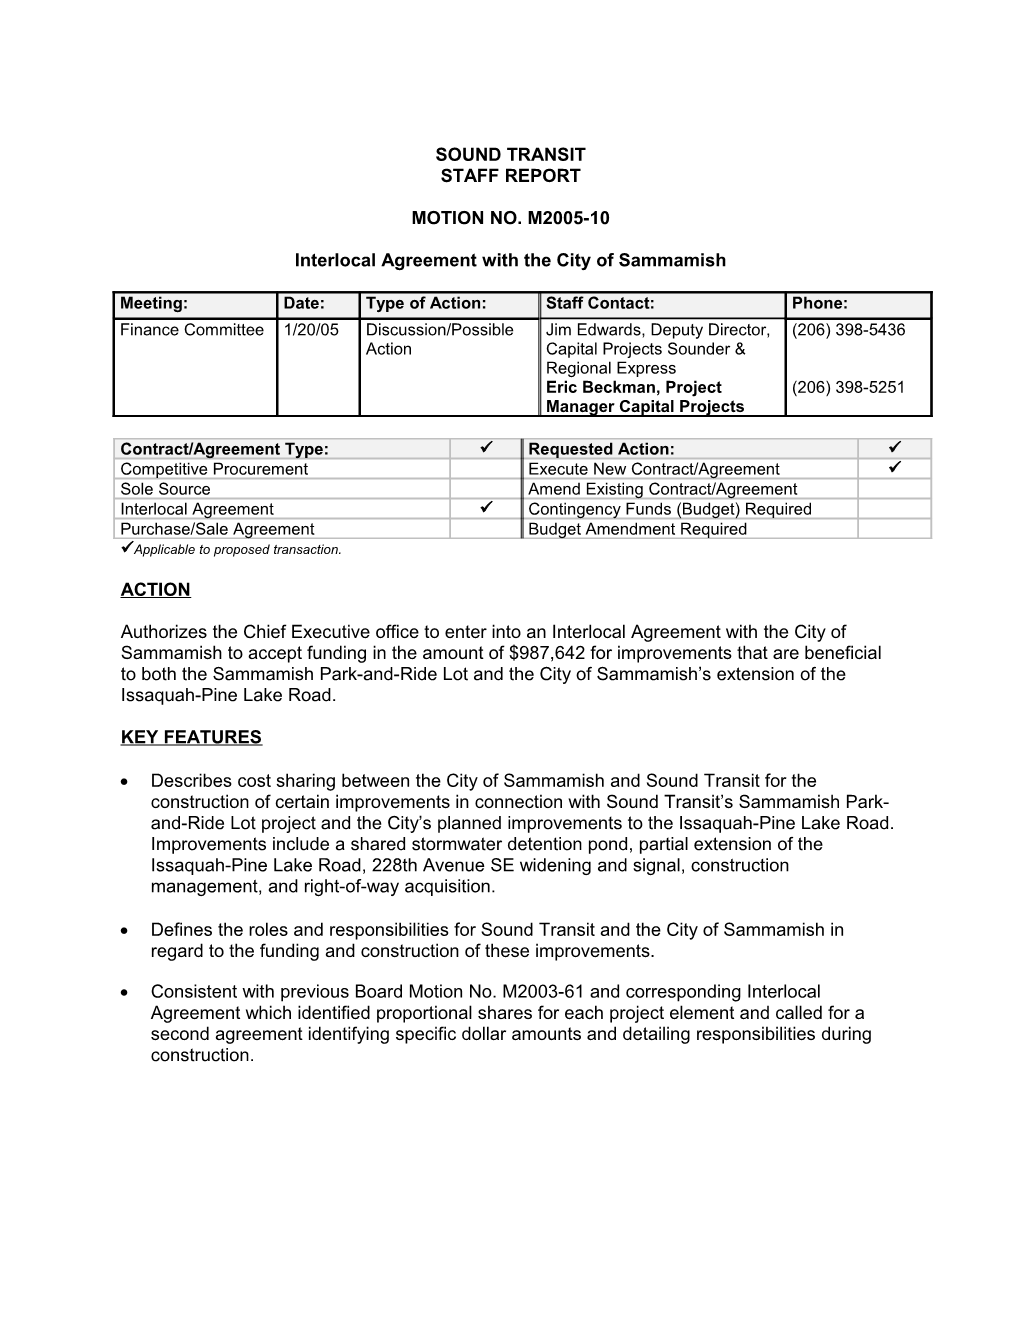 Interlocal Agreement with the City of Sammamish